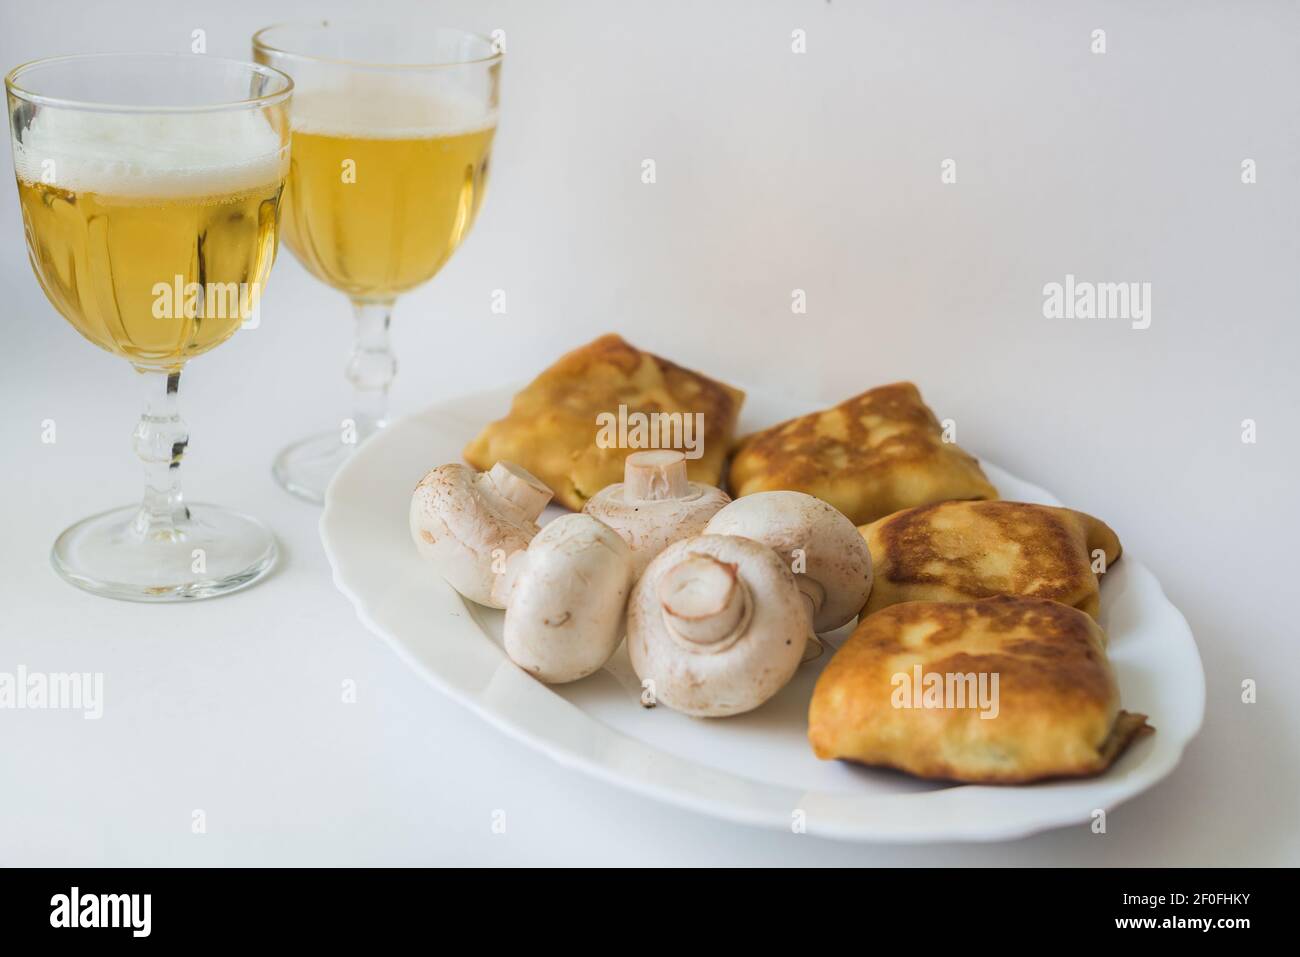 Pancakes with fillings and mushrooms on plate Stock Photo